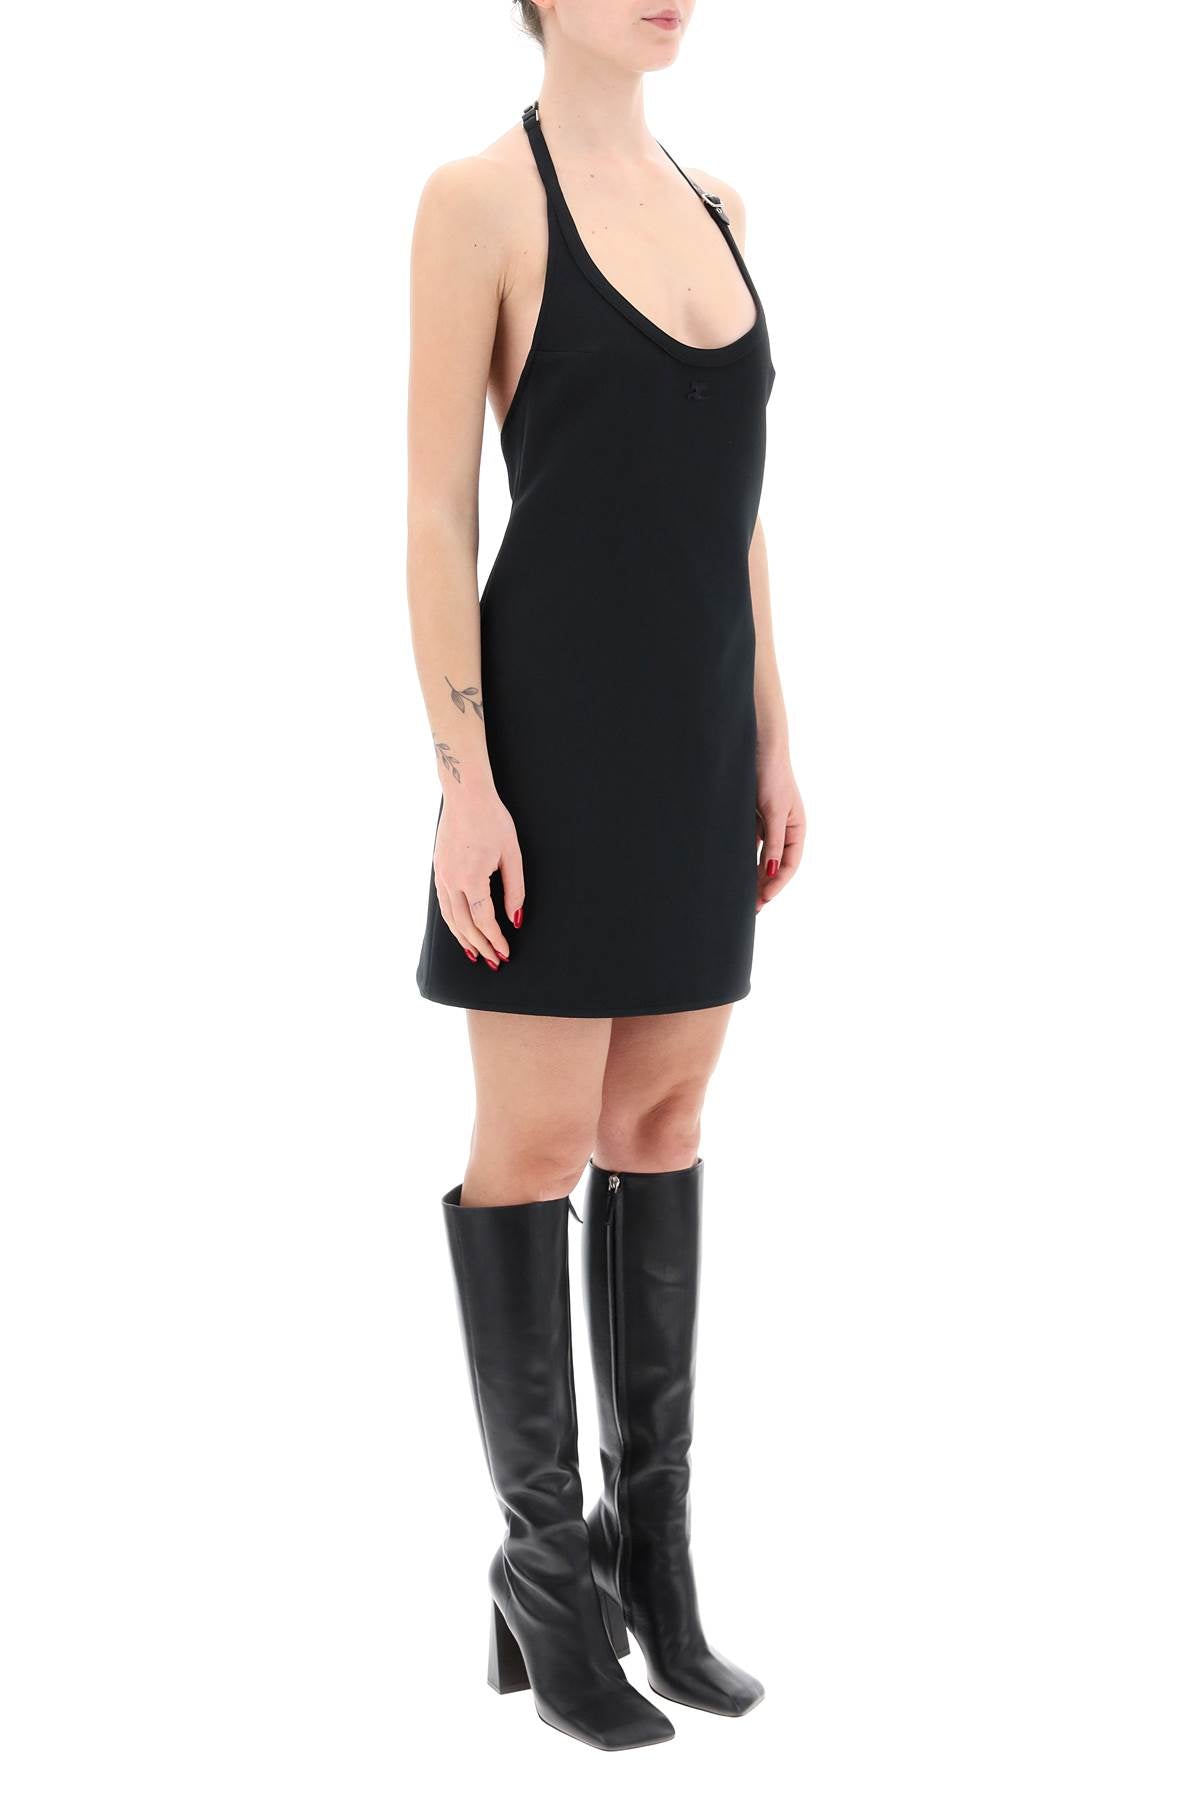 Courreges mini dress with strap and buckle detail.-1